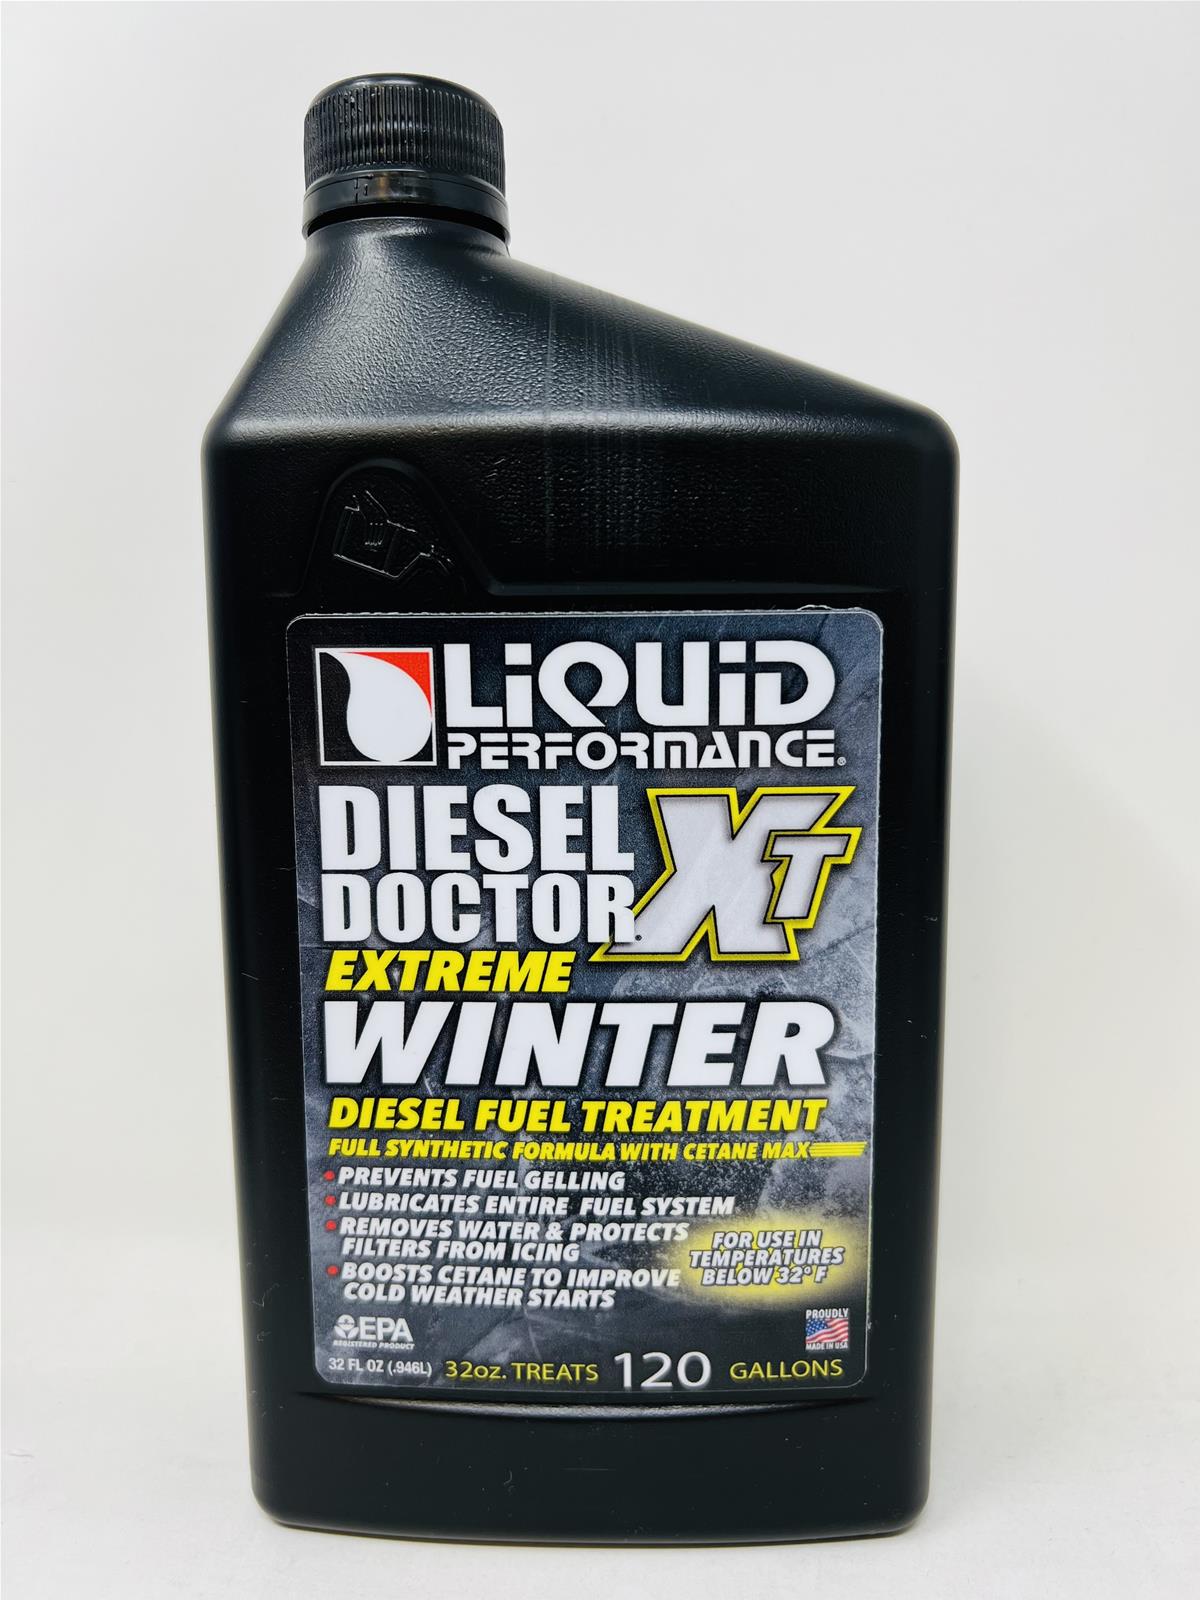 Engine Oil Additive, Performance Booster